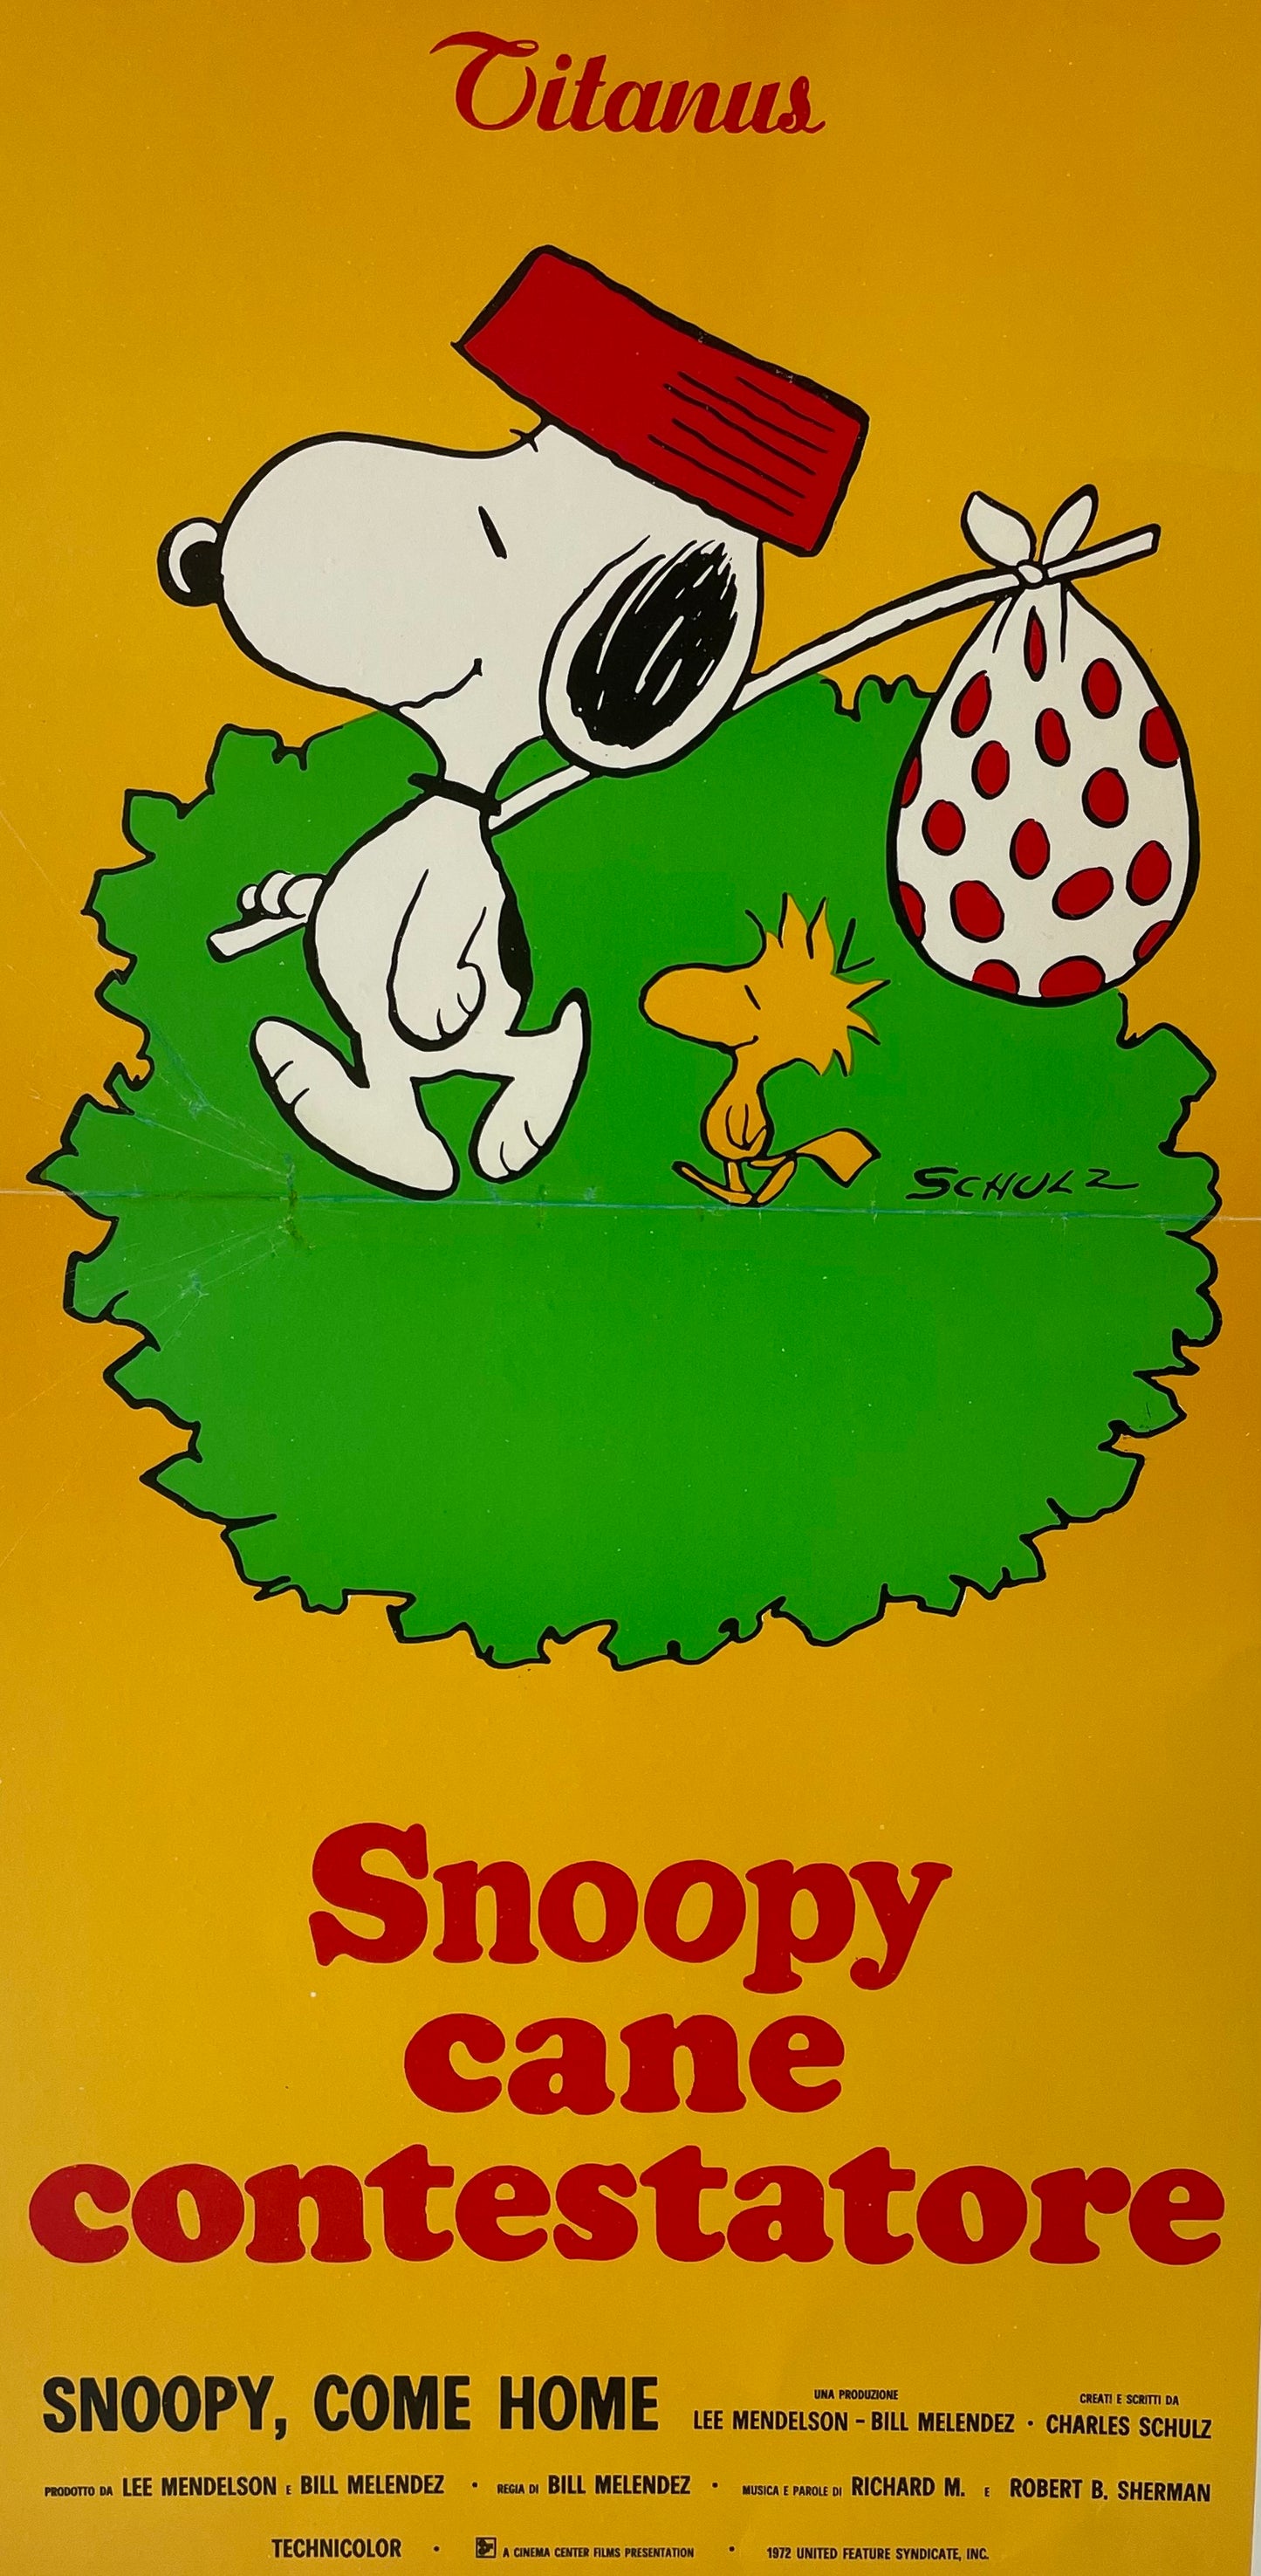 Snoopy Cane Contestatore by Schulz